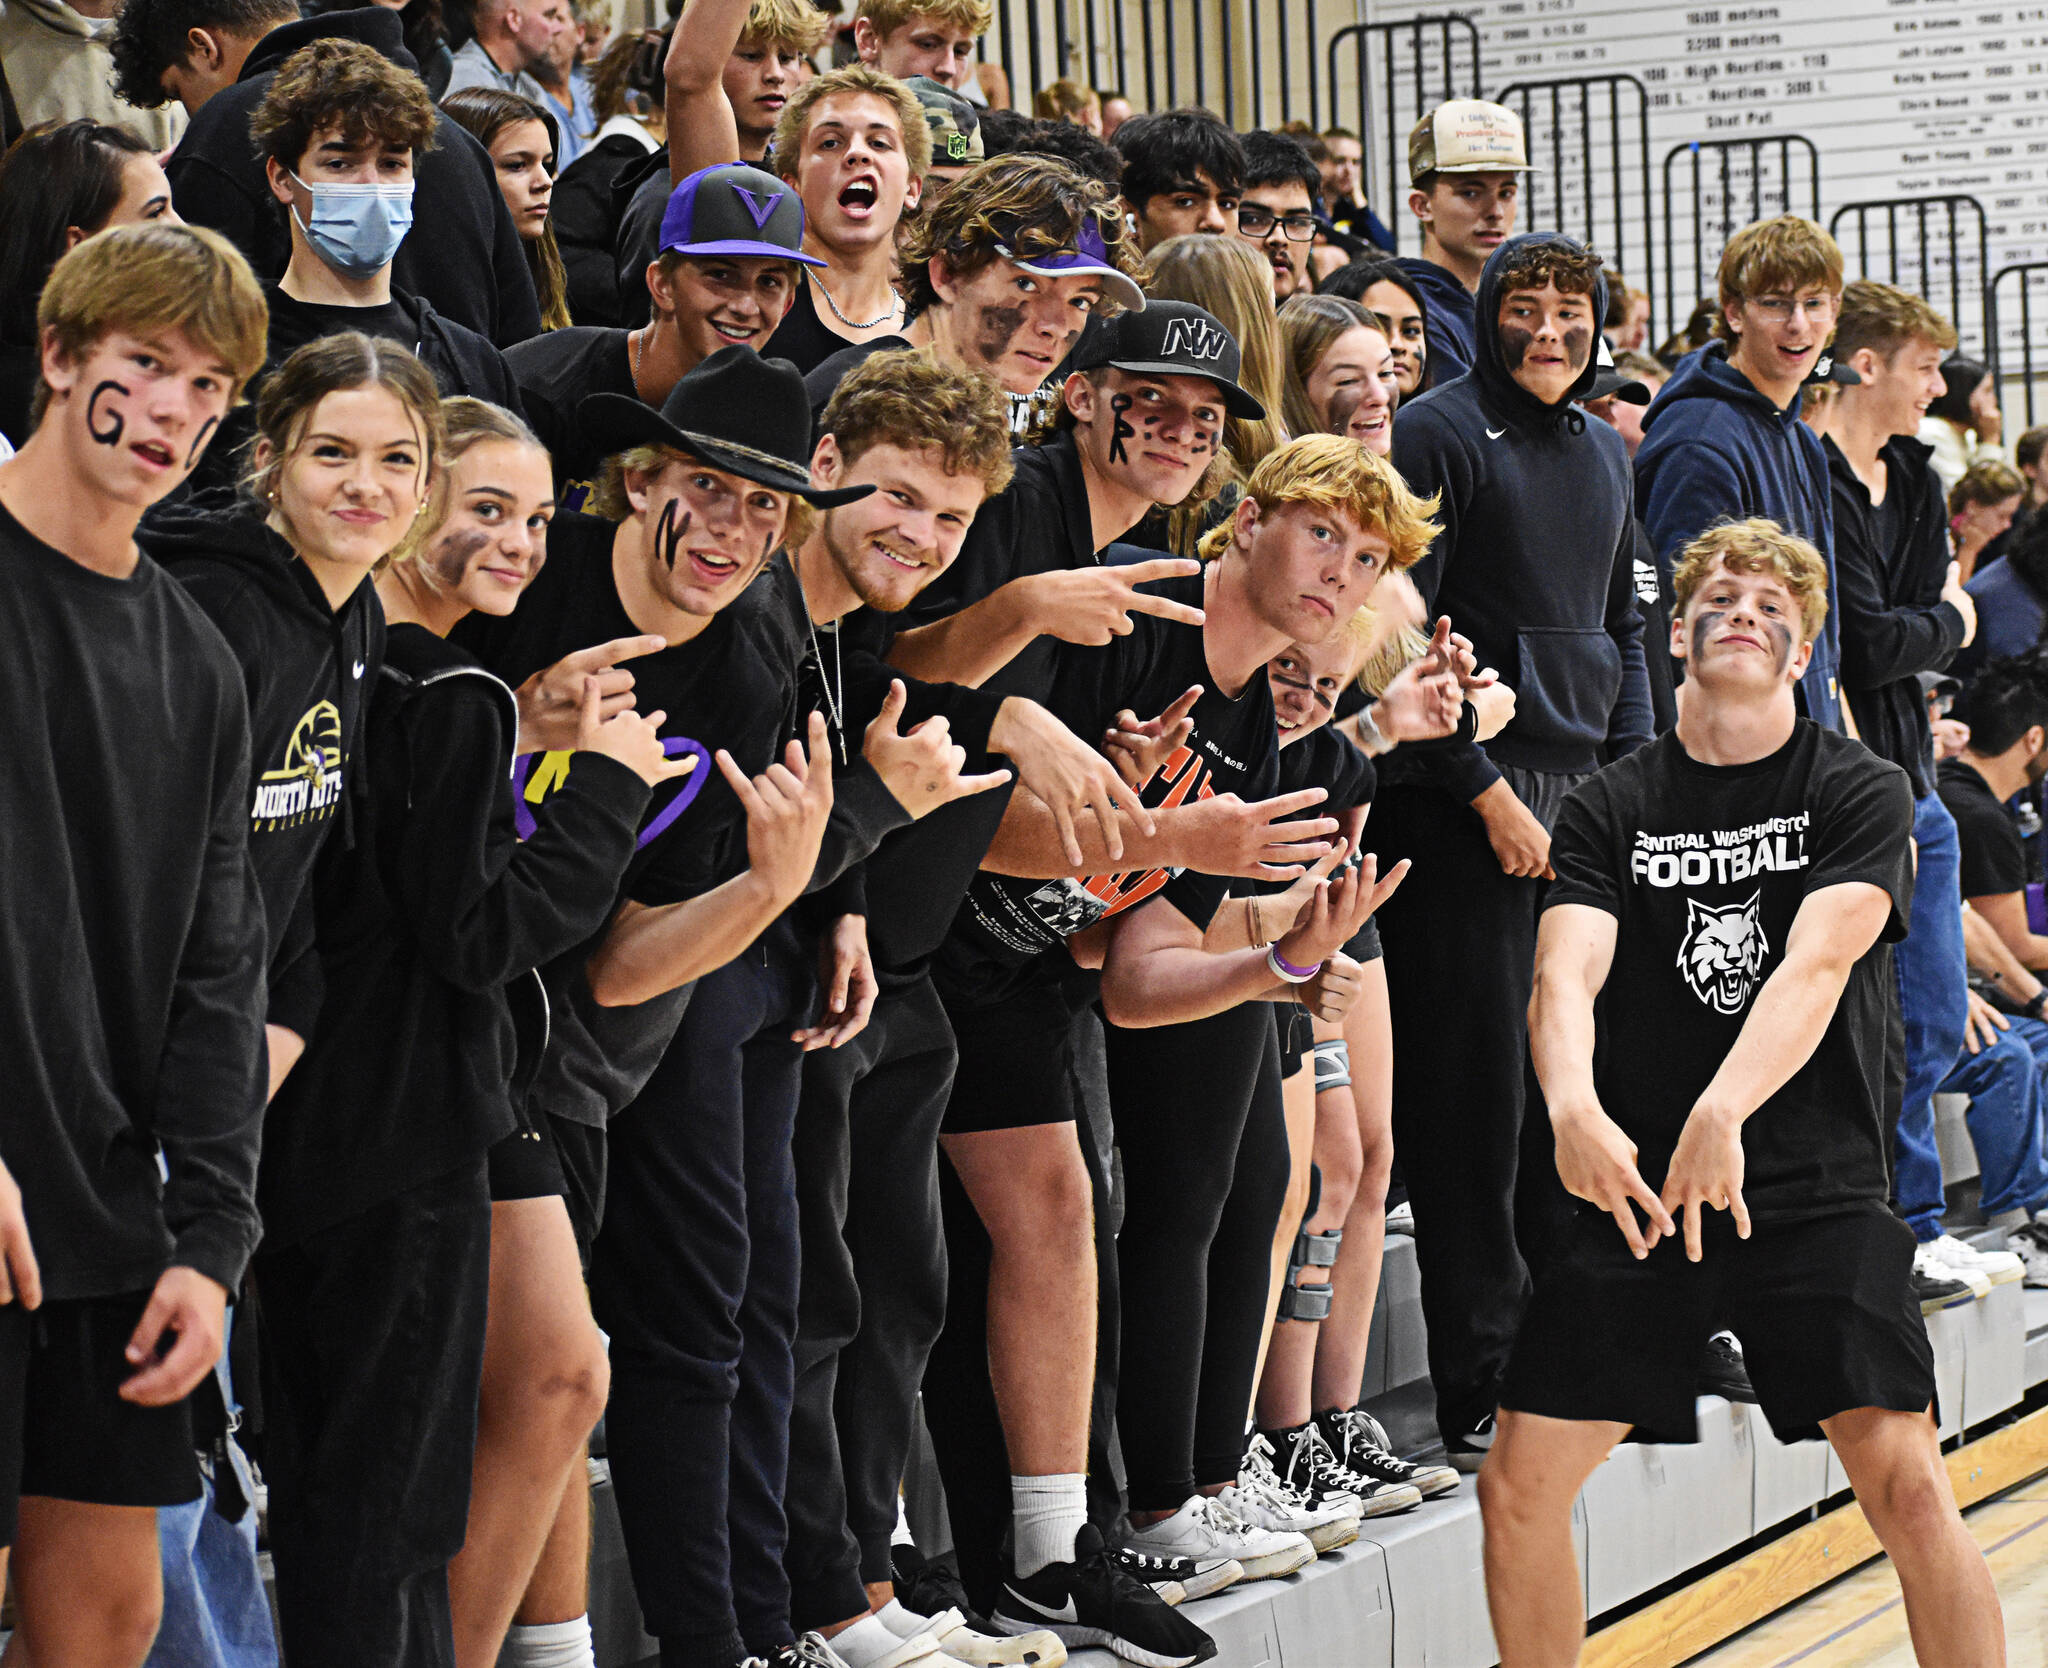 North Kitsap’s student section showed up for the rivalry between the Vikings and Bainbridge Spartans.